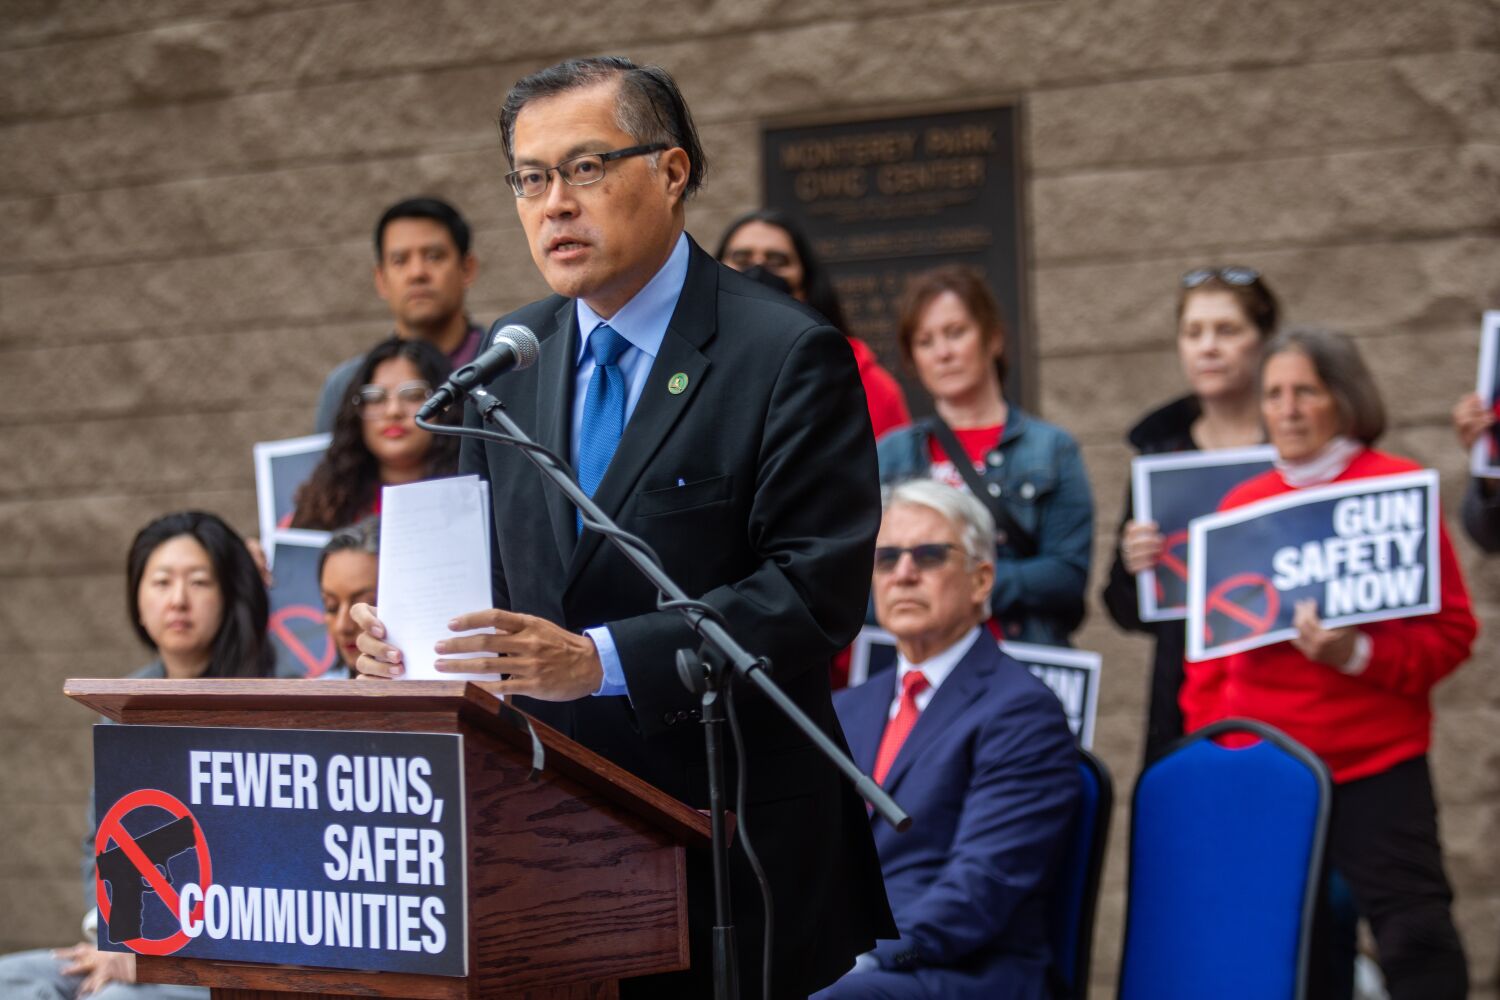 In Monterey Park, site of mass shooting that killed 11, lawmakers urge support for gun control bills